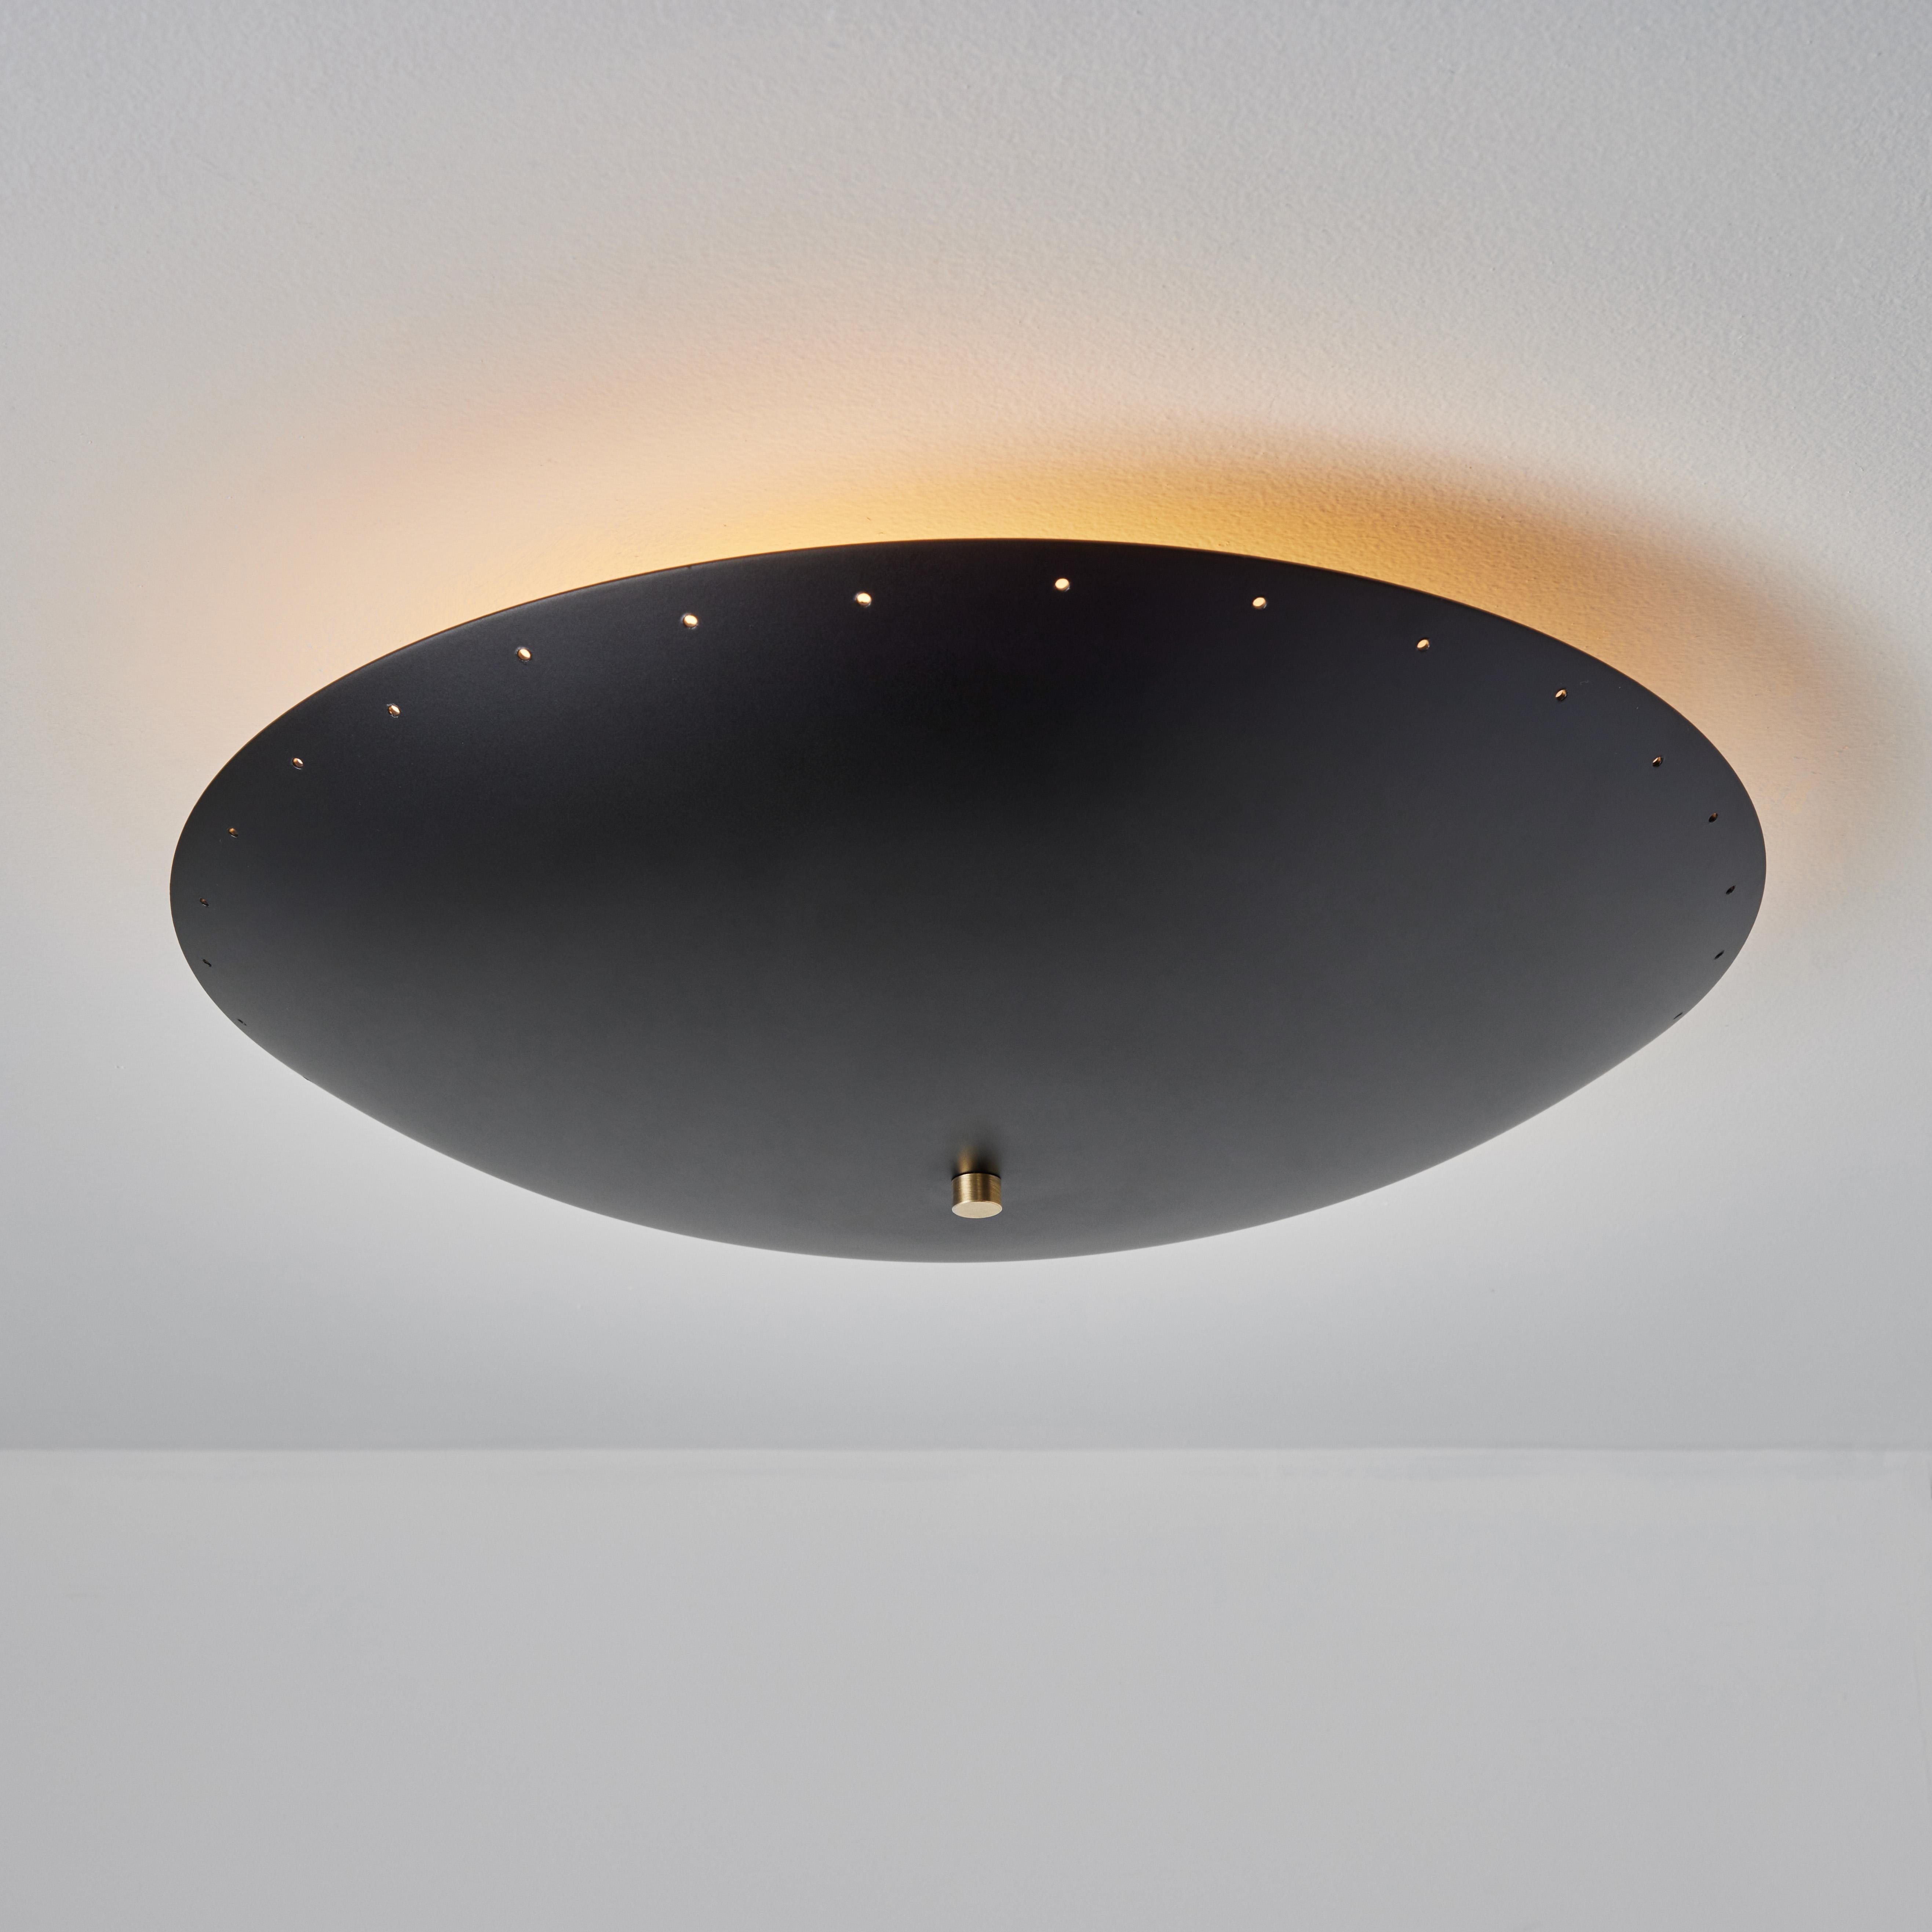 'Nina' perforated dome ceiling lamp in black by Alvaro Benitez. 

Hand-fabricated by Los Angeles based designer and lighting professional Alvaro Benitez, these highly refined table lamps are reminiscent of the iconic midcentury Italian designs of